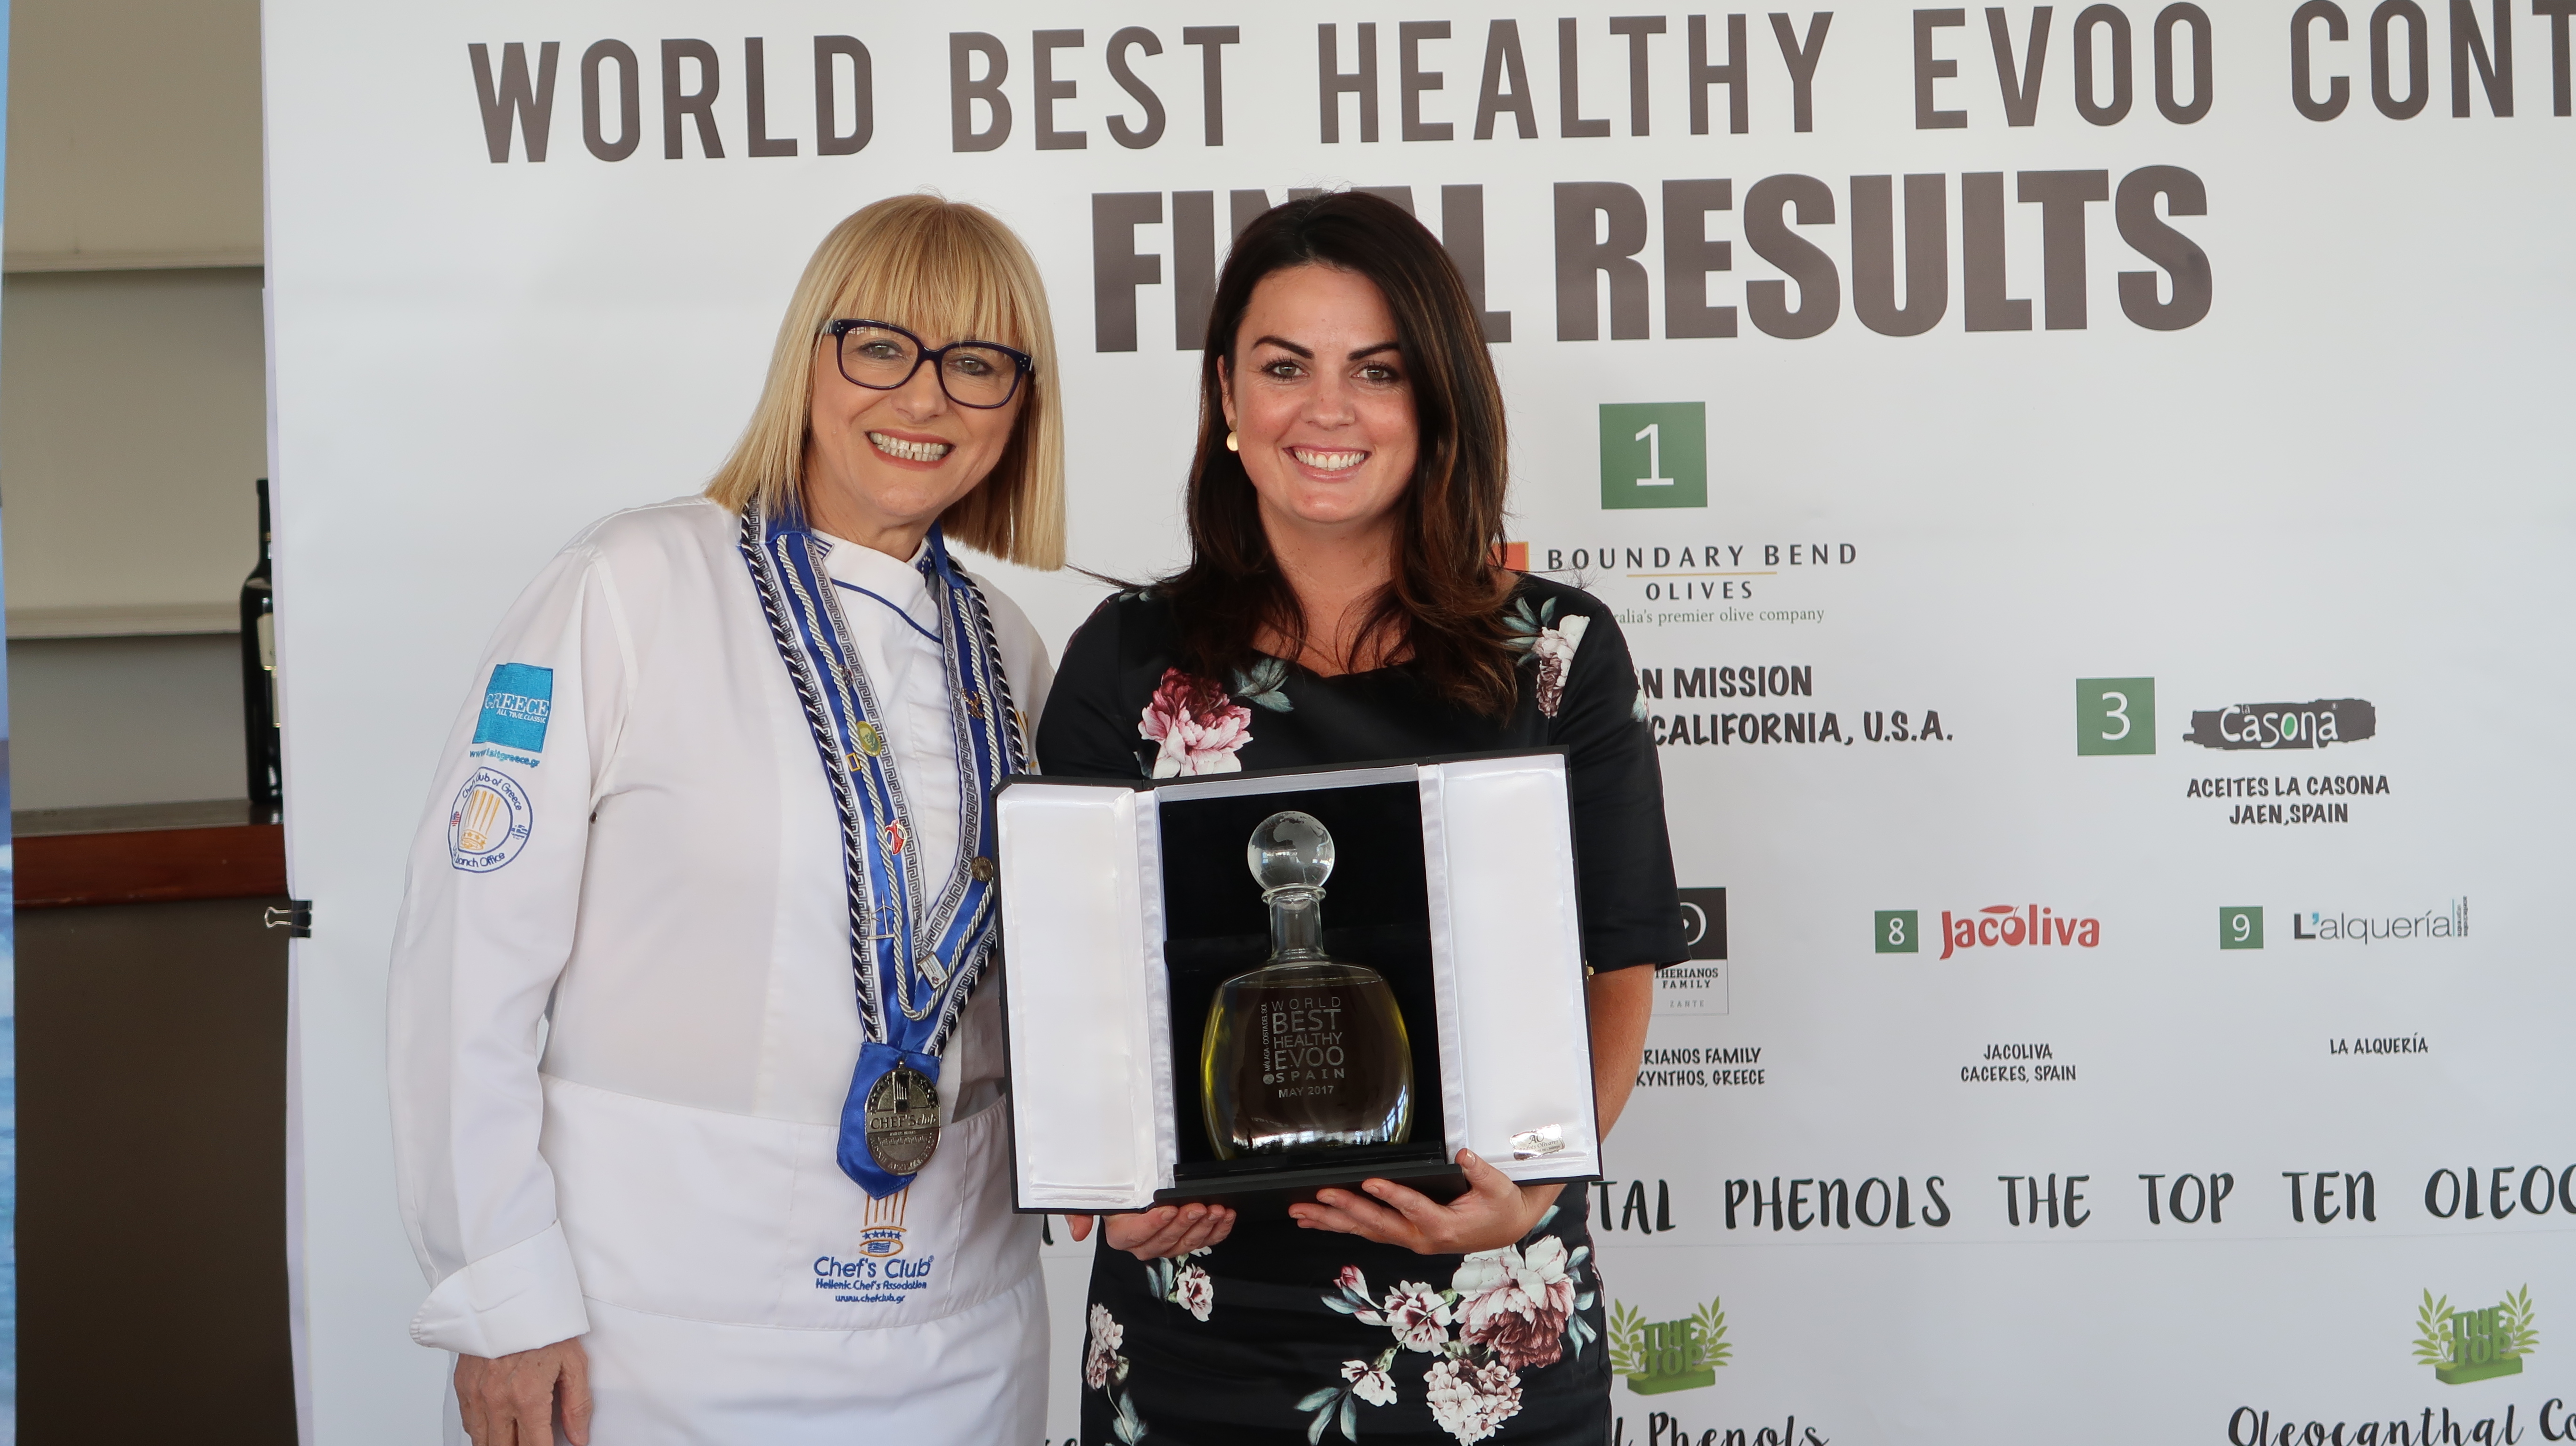 Jacqui Plozza, on stage holding plaque, accepts the Healthiest EVOO Award for Cobram Estate, presented by international chef Maria Loi